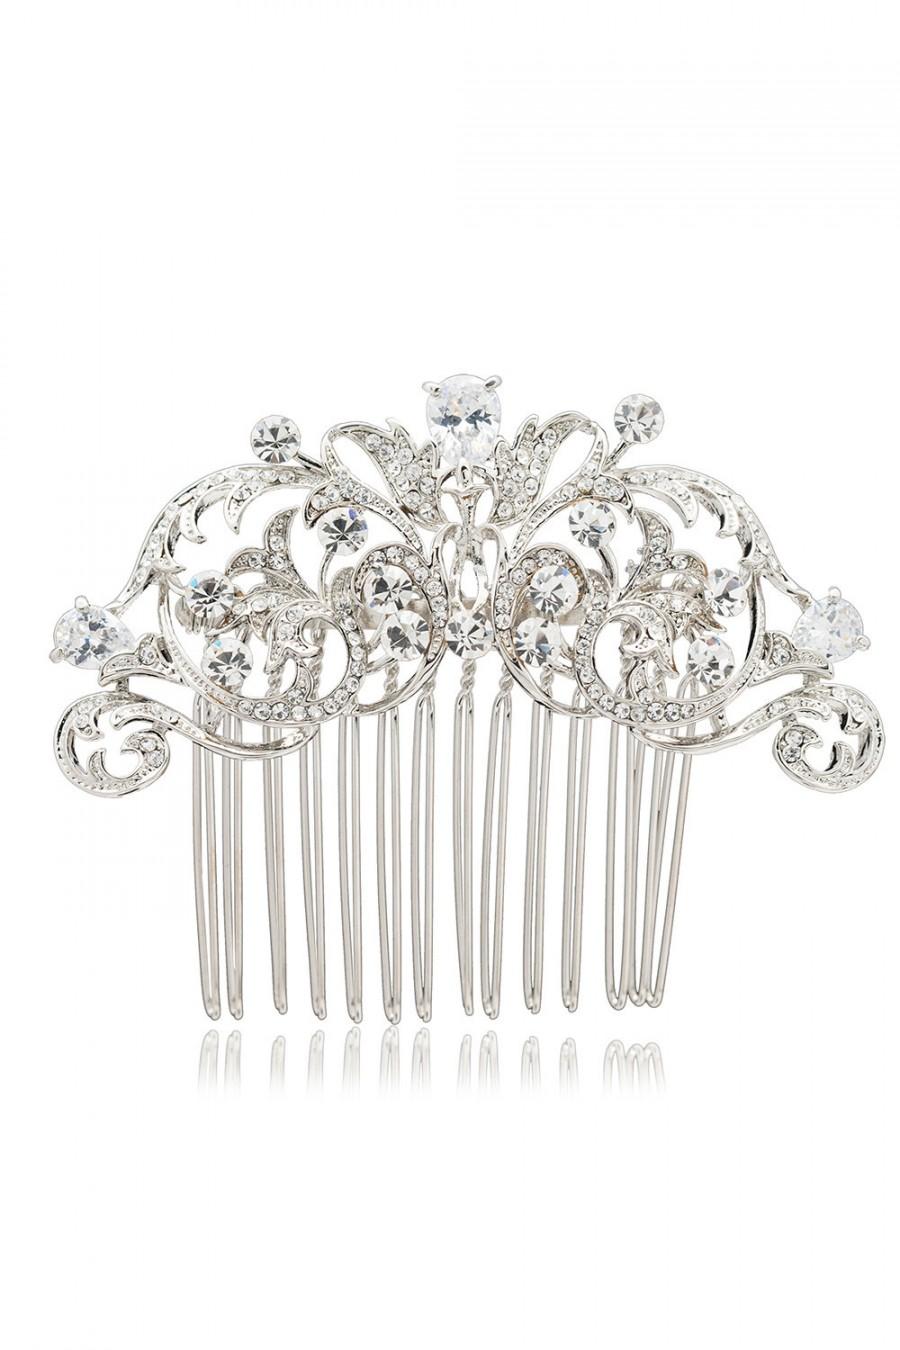 Mariage - Flower Hair Comb Wedding Hairpins for Bridal Head Jewelry Accessories with Rhinestone Crystals 2253R